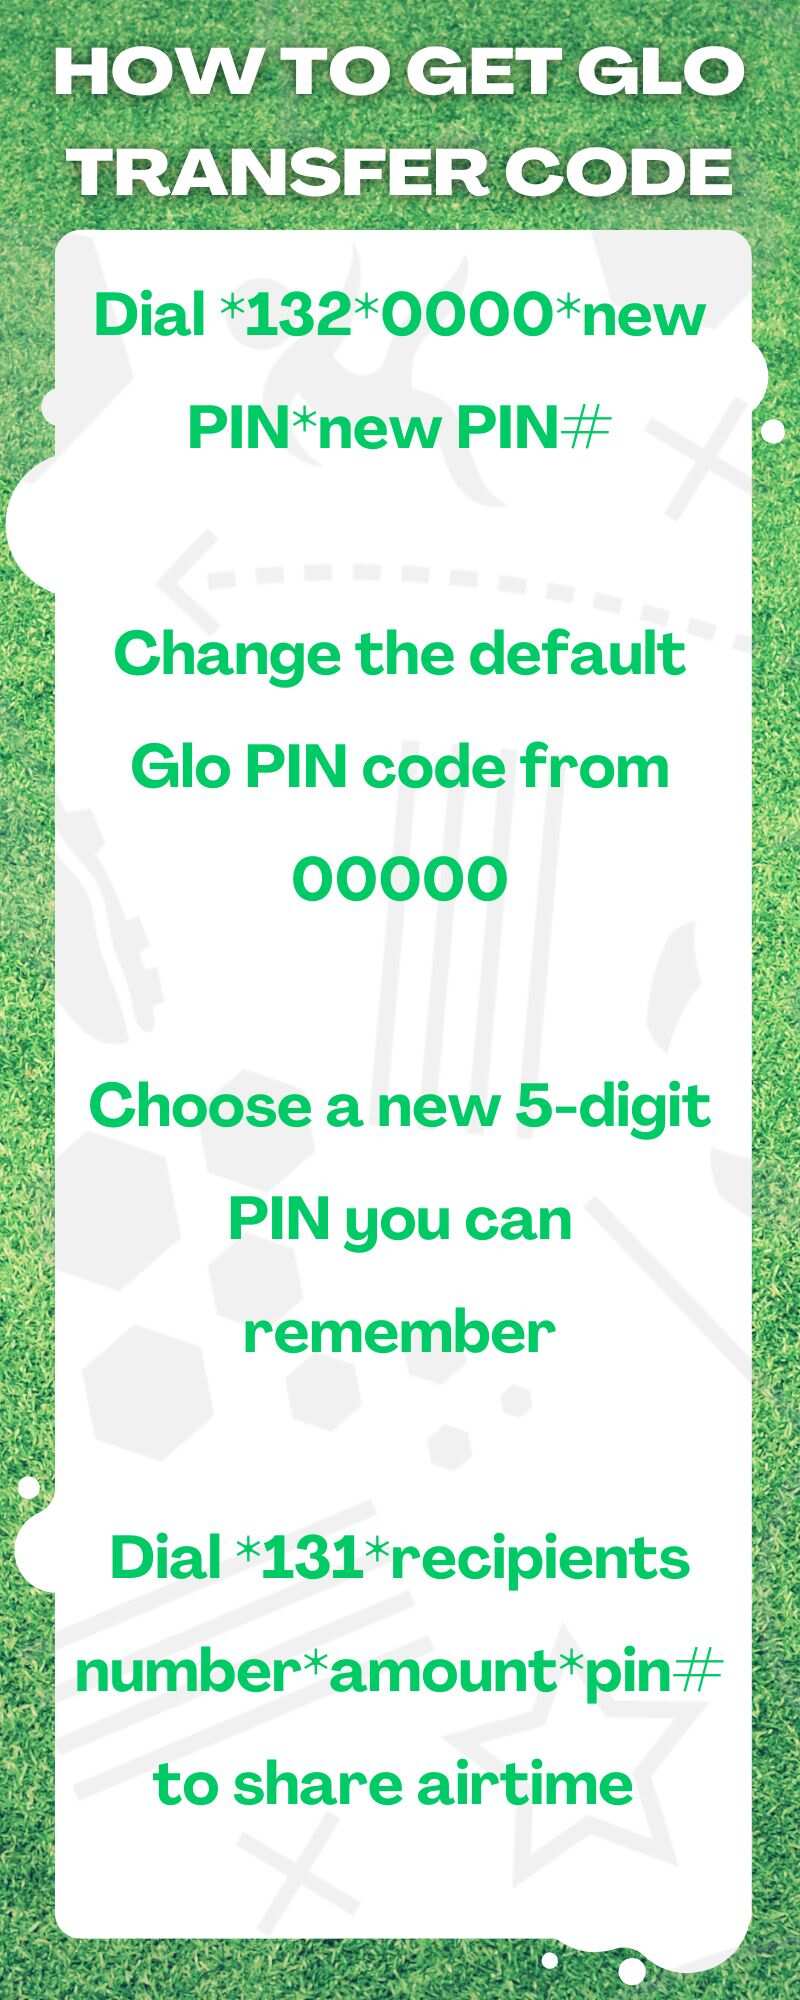 How to get Glo transfer code